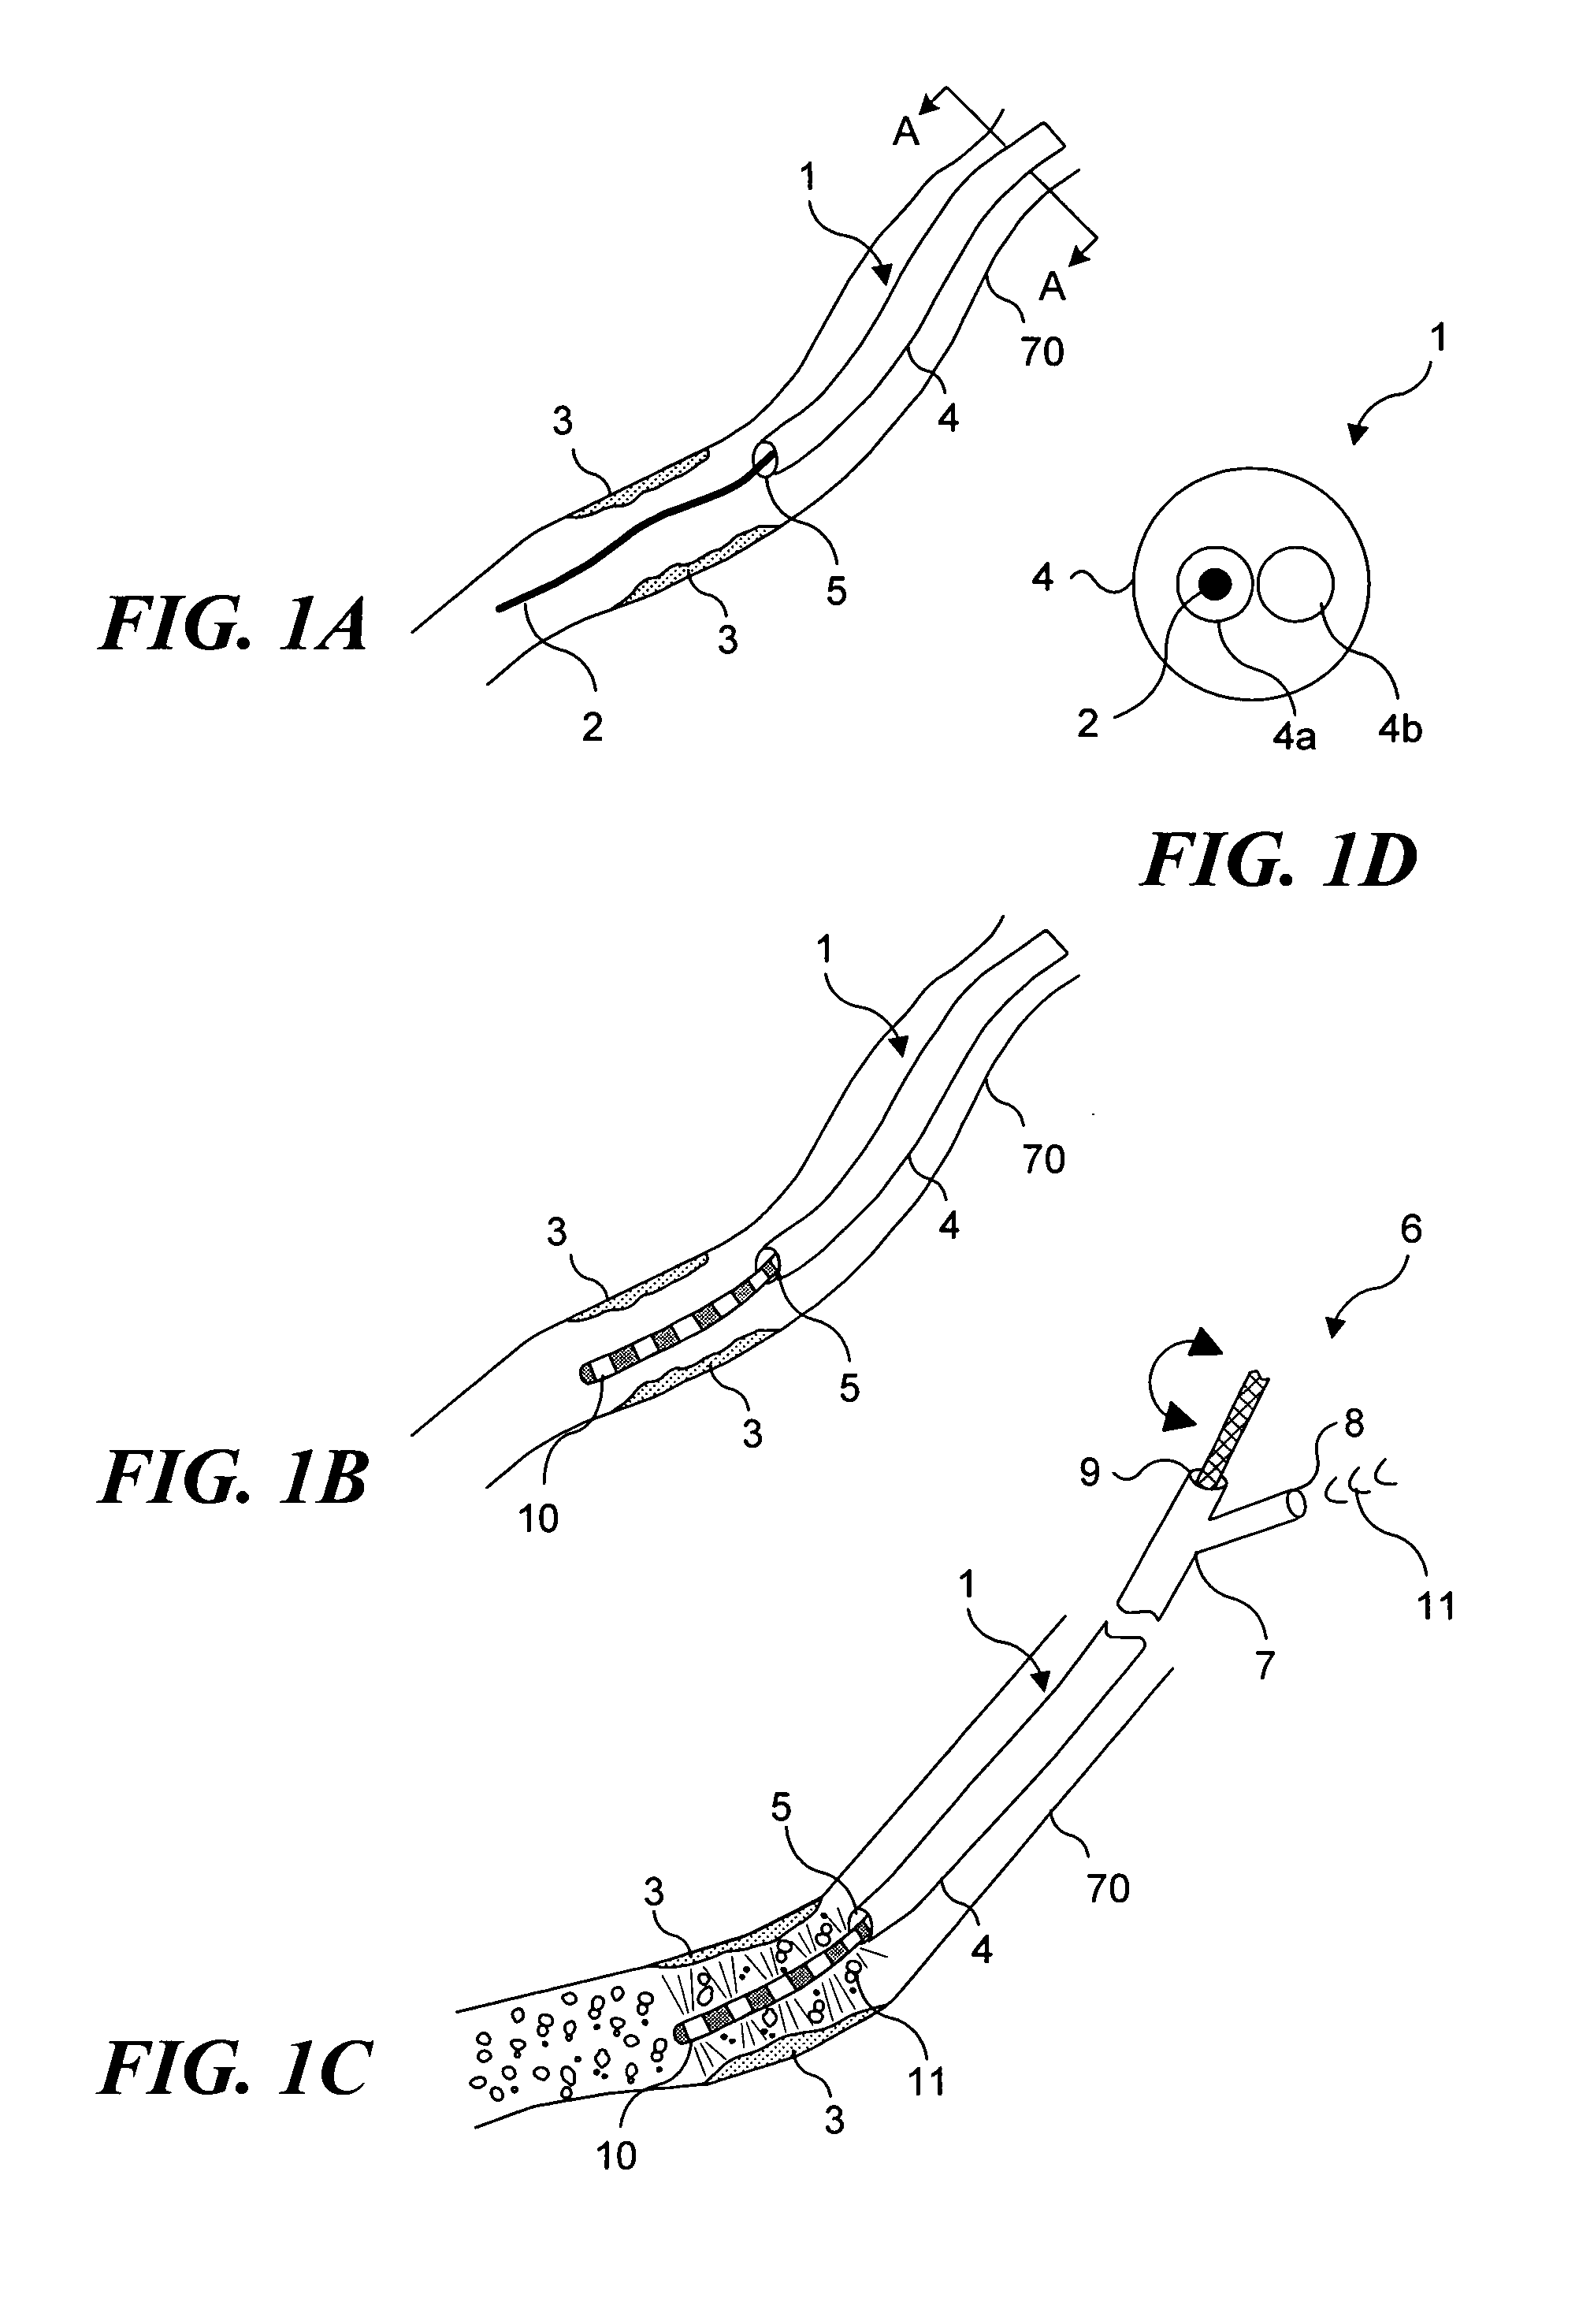 Light generating device that self centers within a lumen to render photodynamic therapy